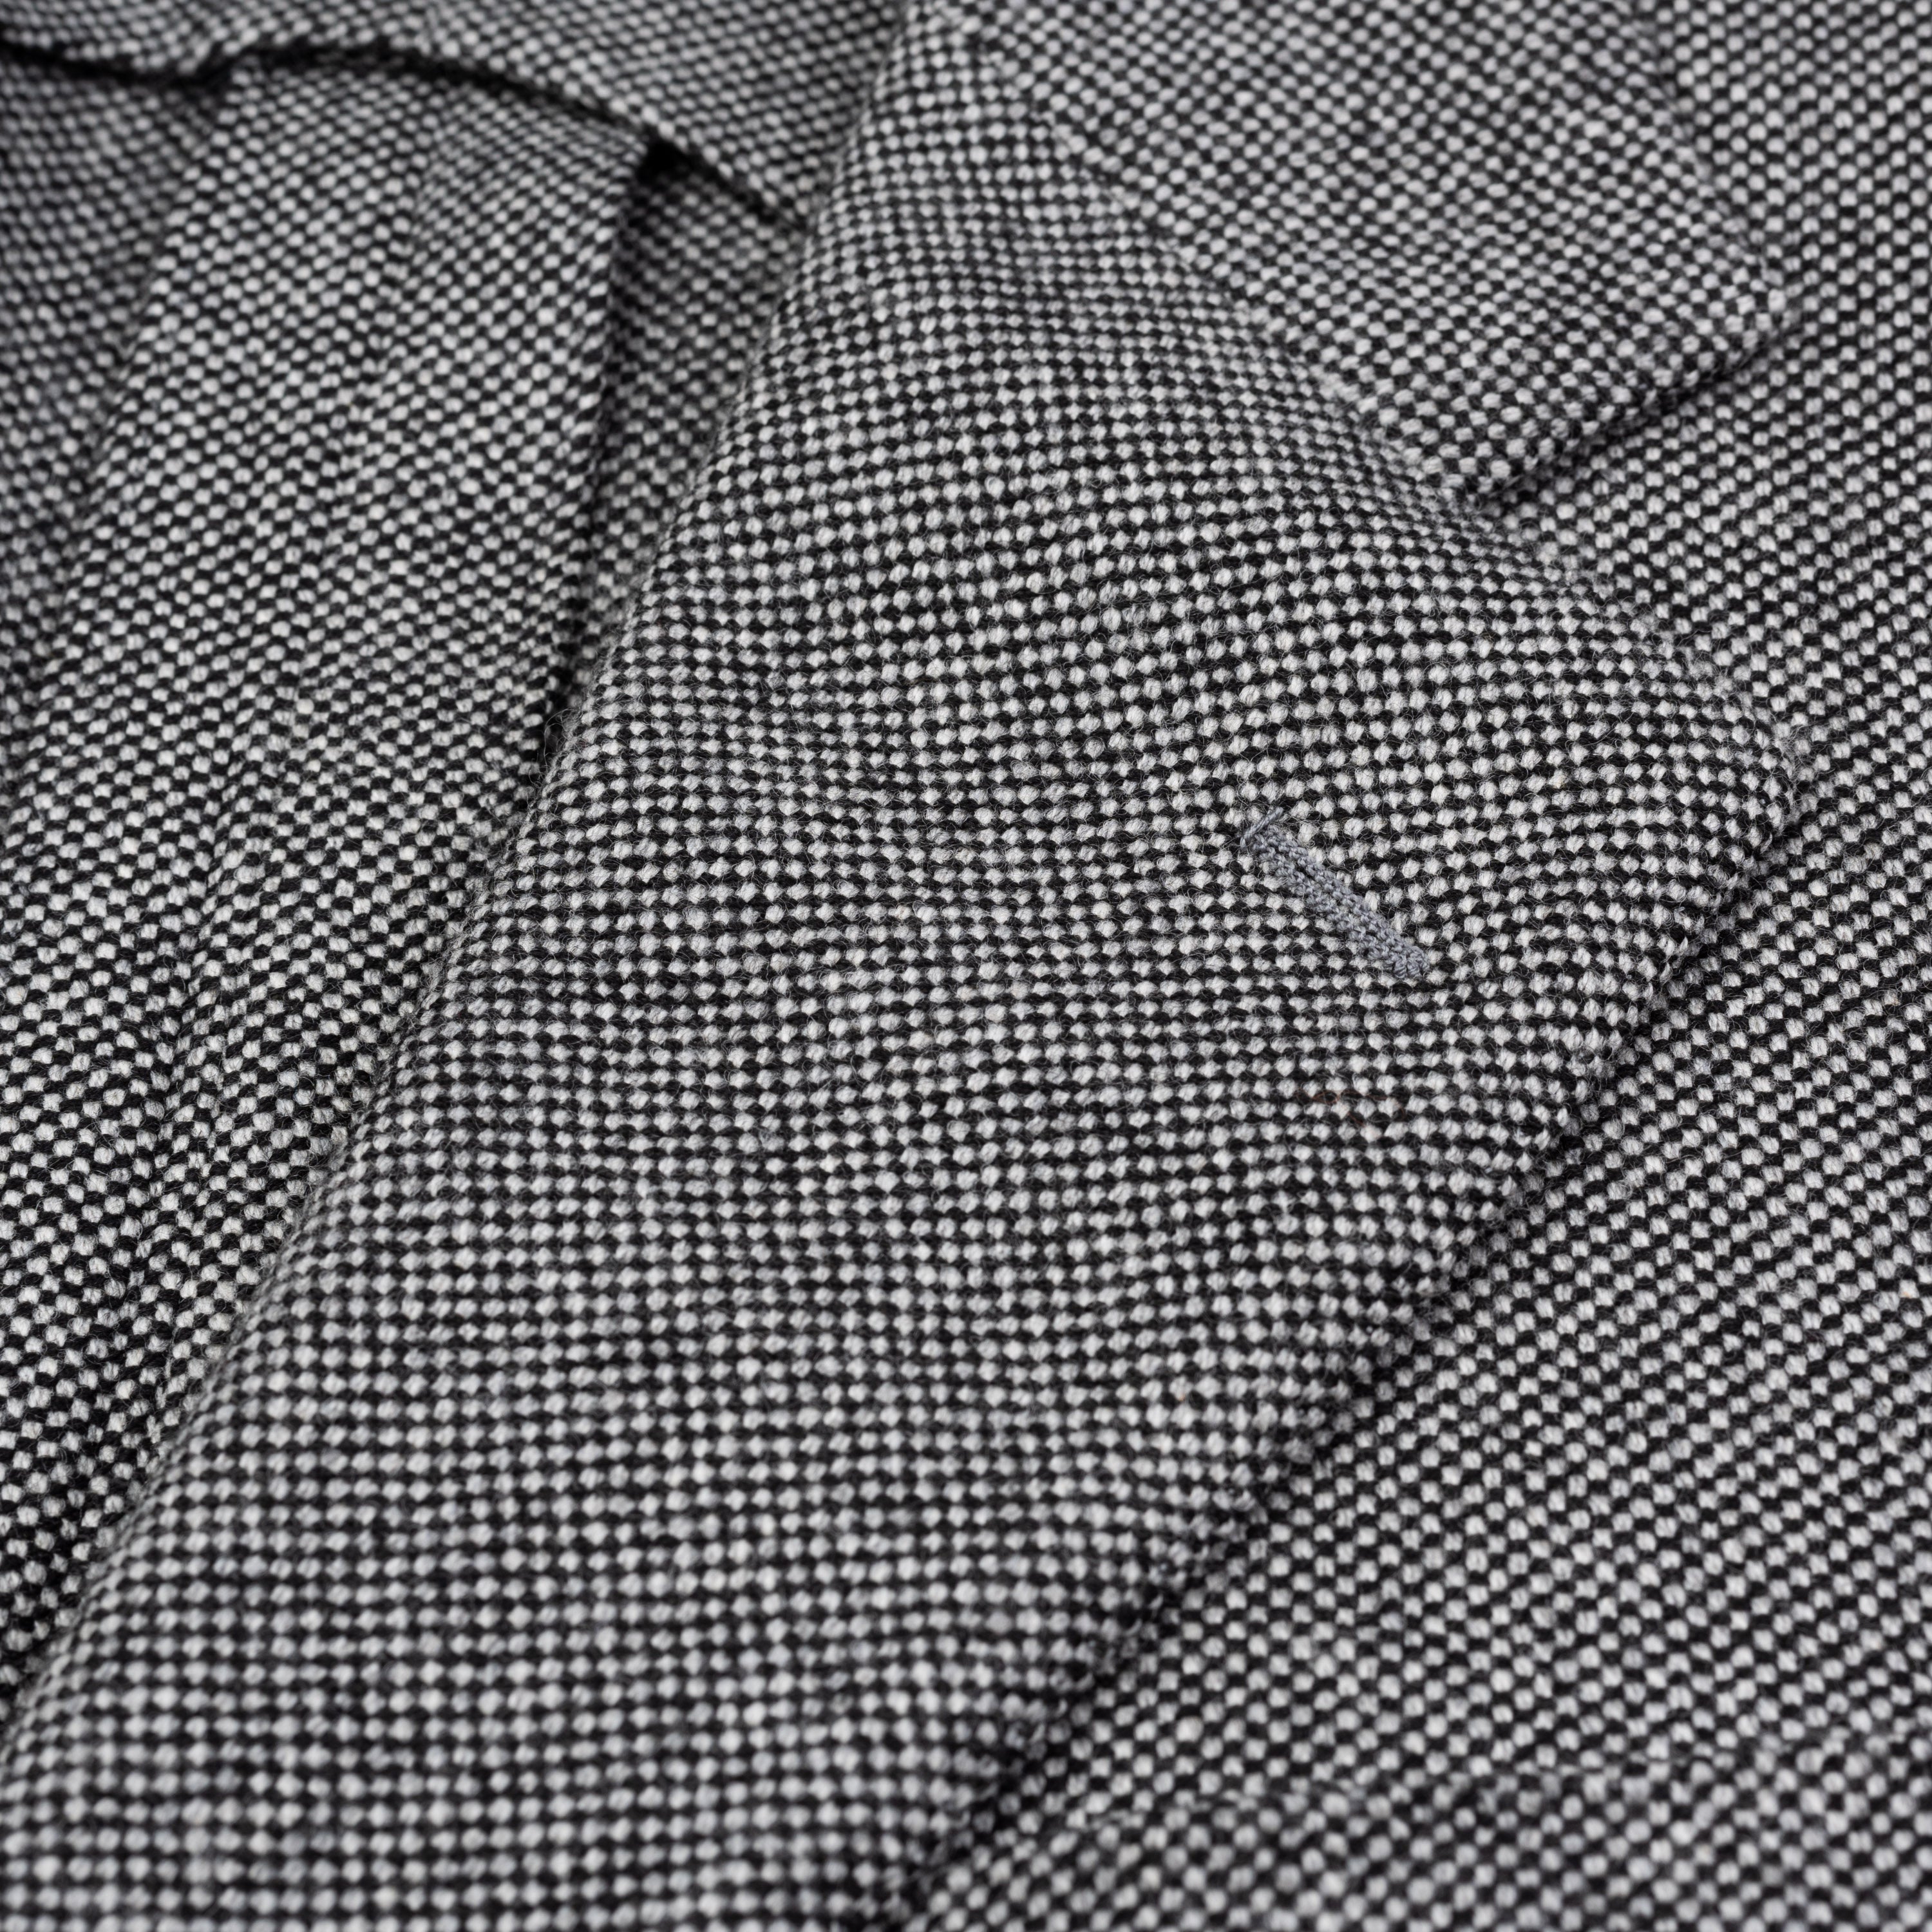 CASTANGIA 1850 Gray Micro Check Wool Flannel Unlined Sport Coat Jacket NEW CASTANGIA